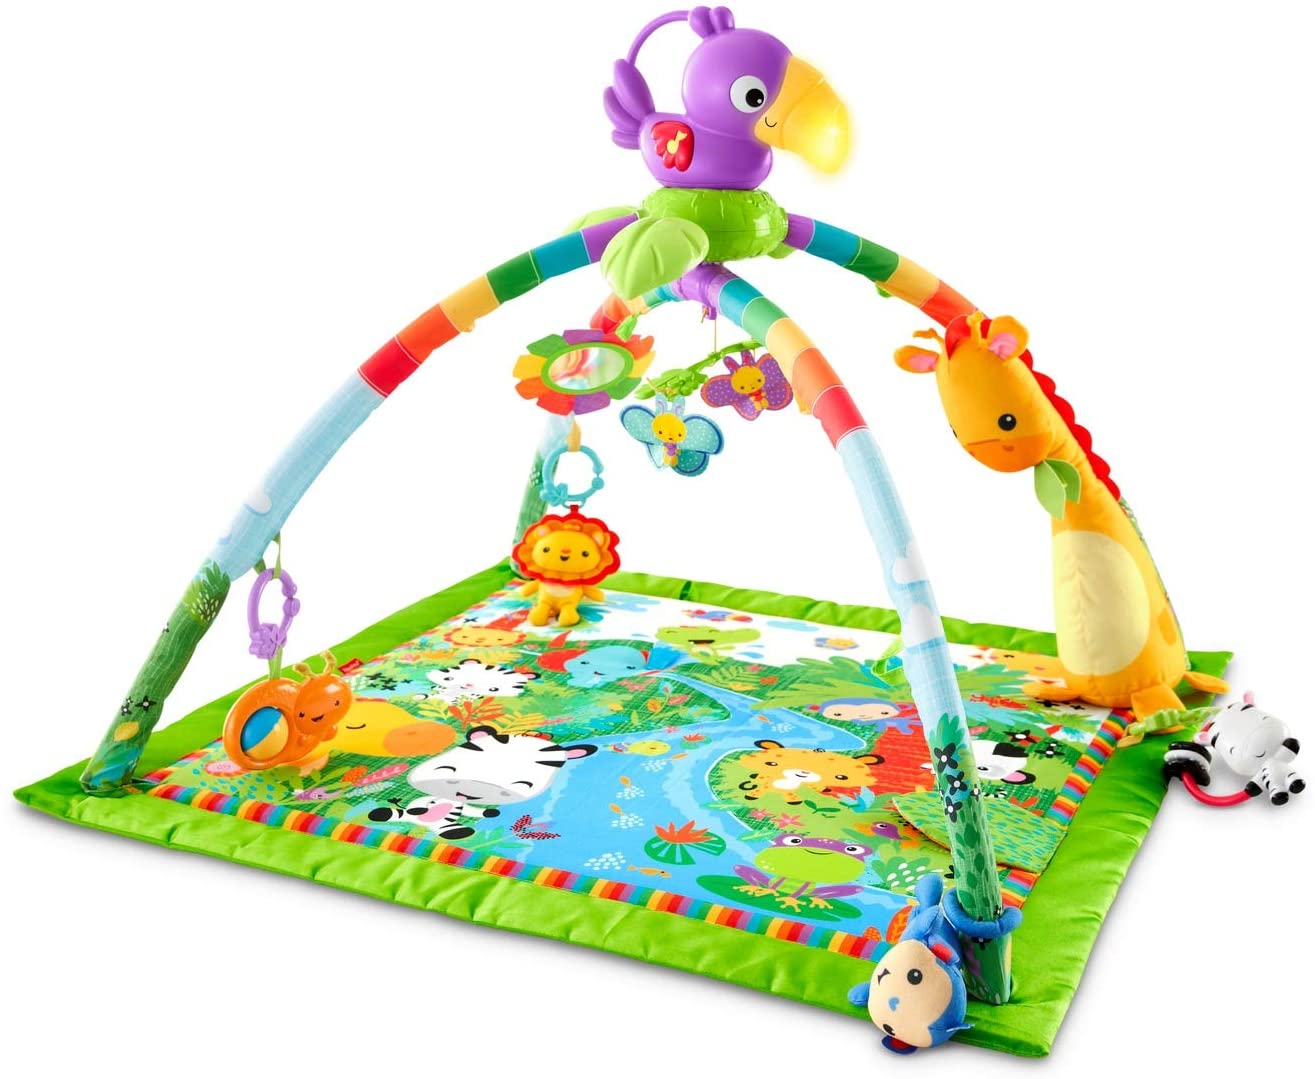 Fisher-Price DFP08 - Rainforest adventure blanket, play mat with music and lights, play blanket for babies with a soft play bow, from 0 months, with toucan